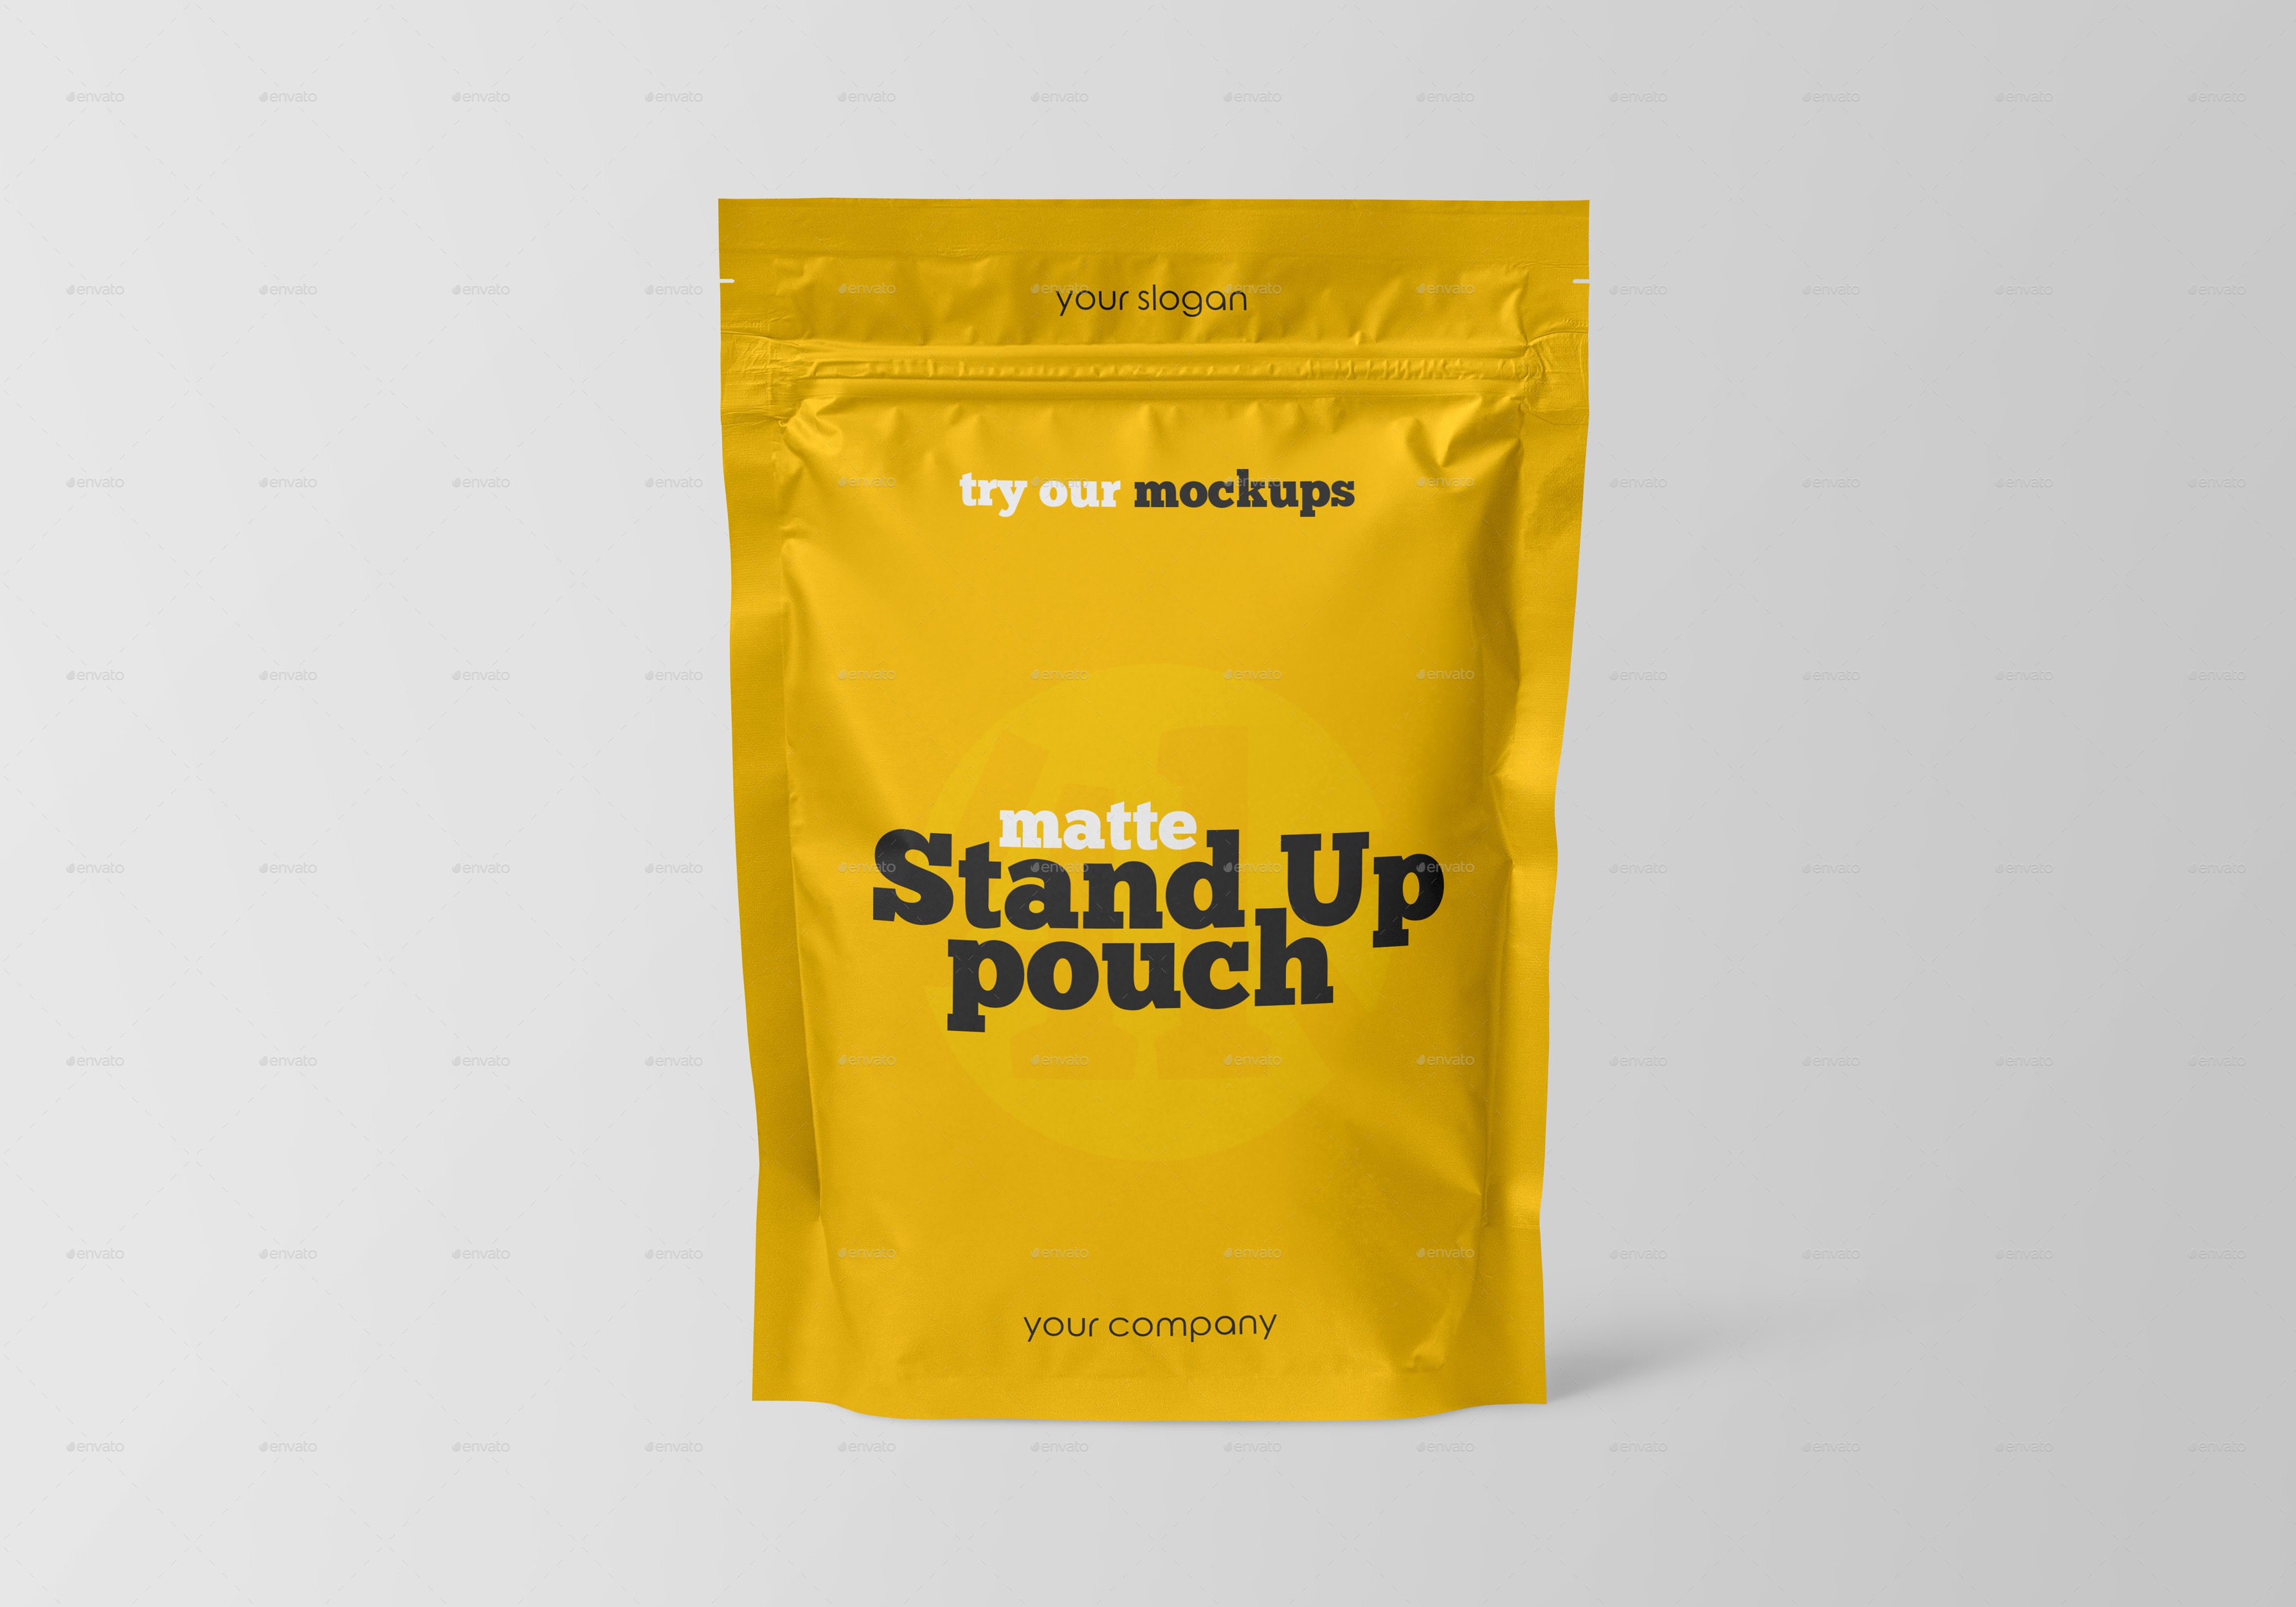 Matte Stand-Up Pouch Mockup Set, Graphics | GraphicRiver